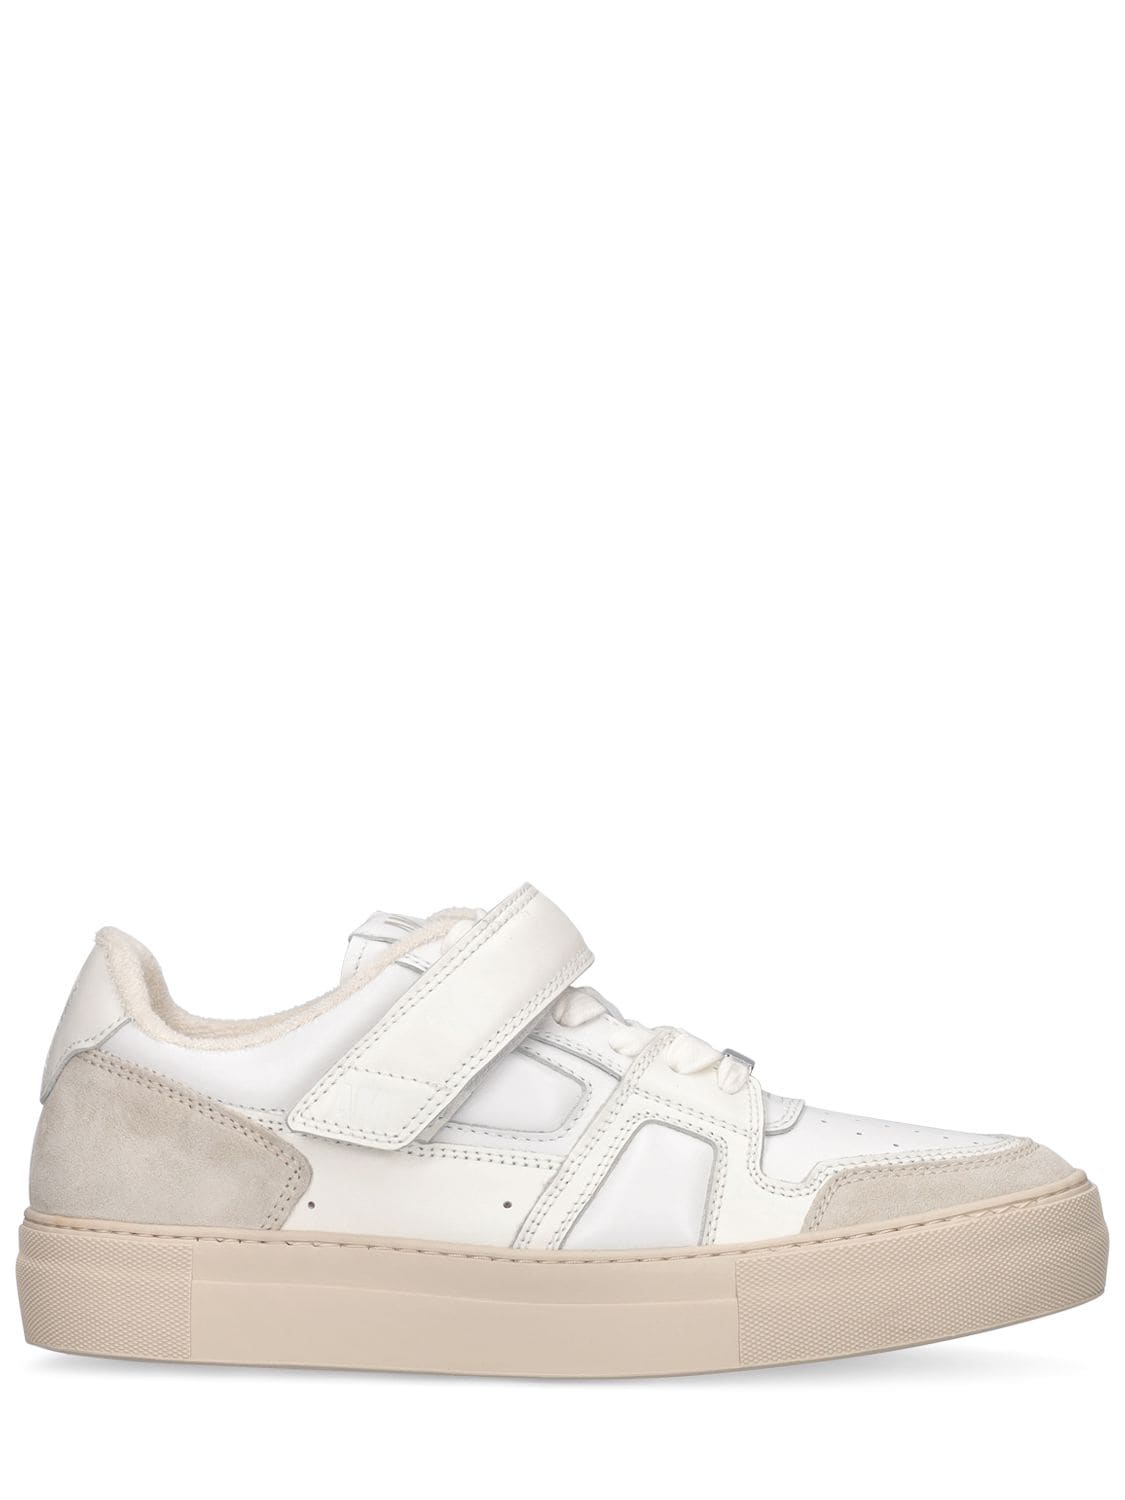 AMI PARIS Smooth Leather Low Top Sneakers